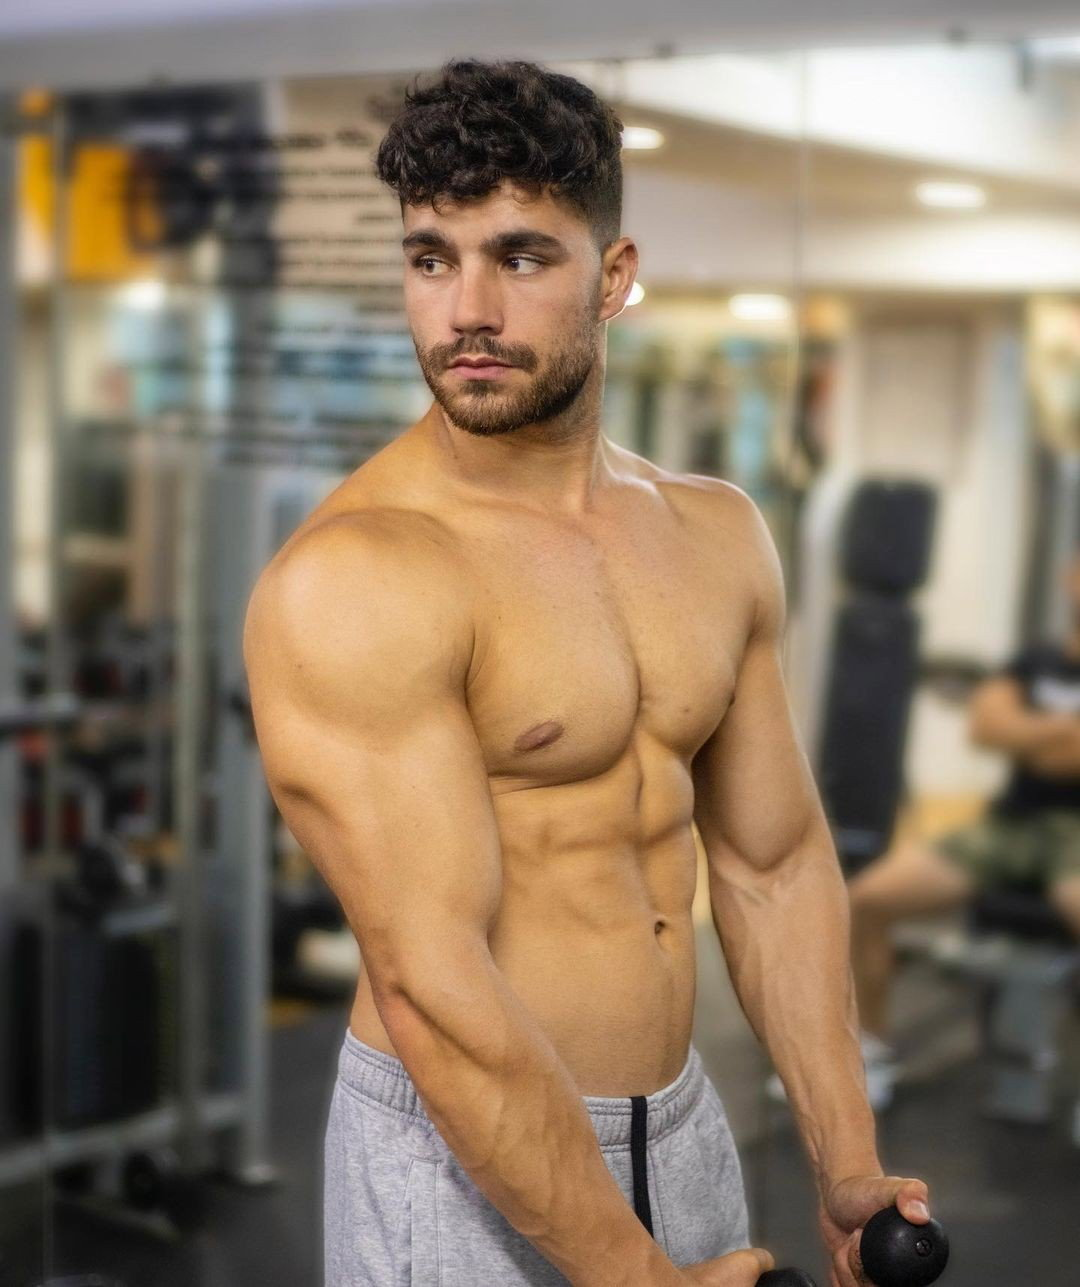 Watch the Photo by pmhu4242 with the username @pmhu4242, posted on January 18, 2022. The post is about the topic musclegay. and the text says '#musclegay #hunk #hotguys #sixpack'